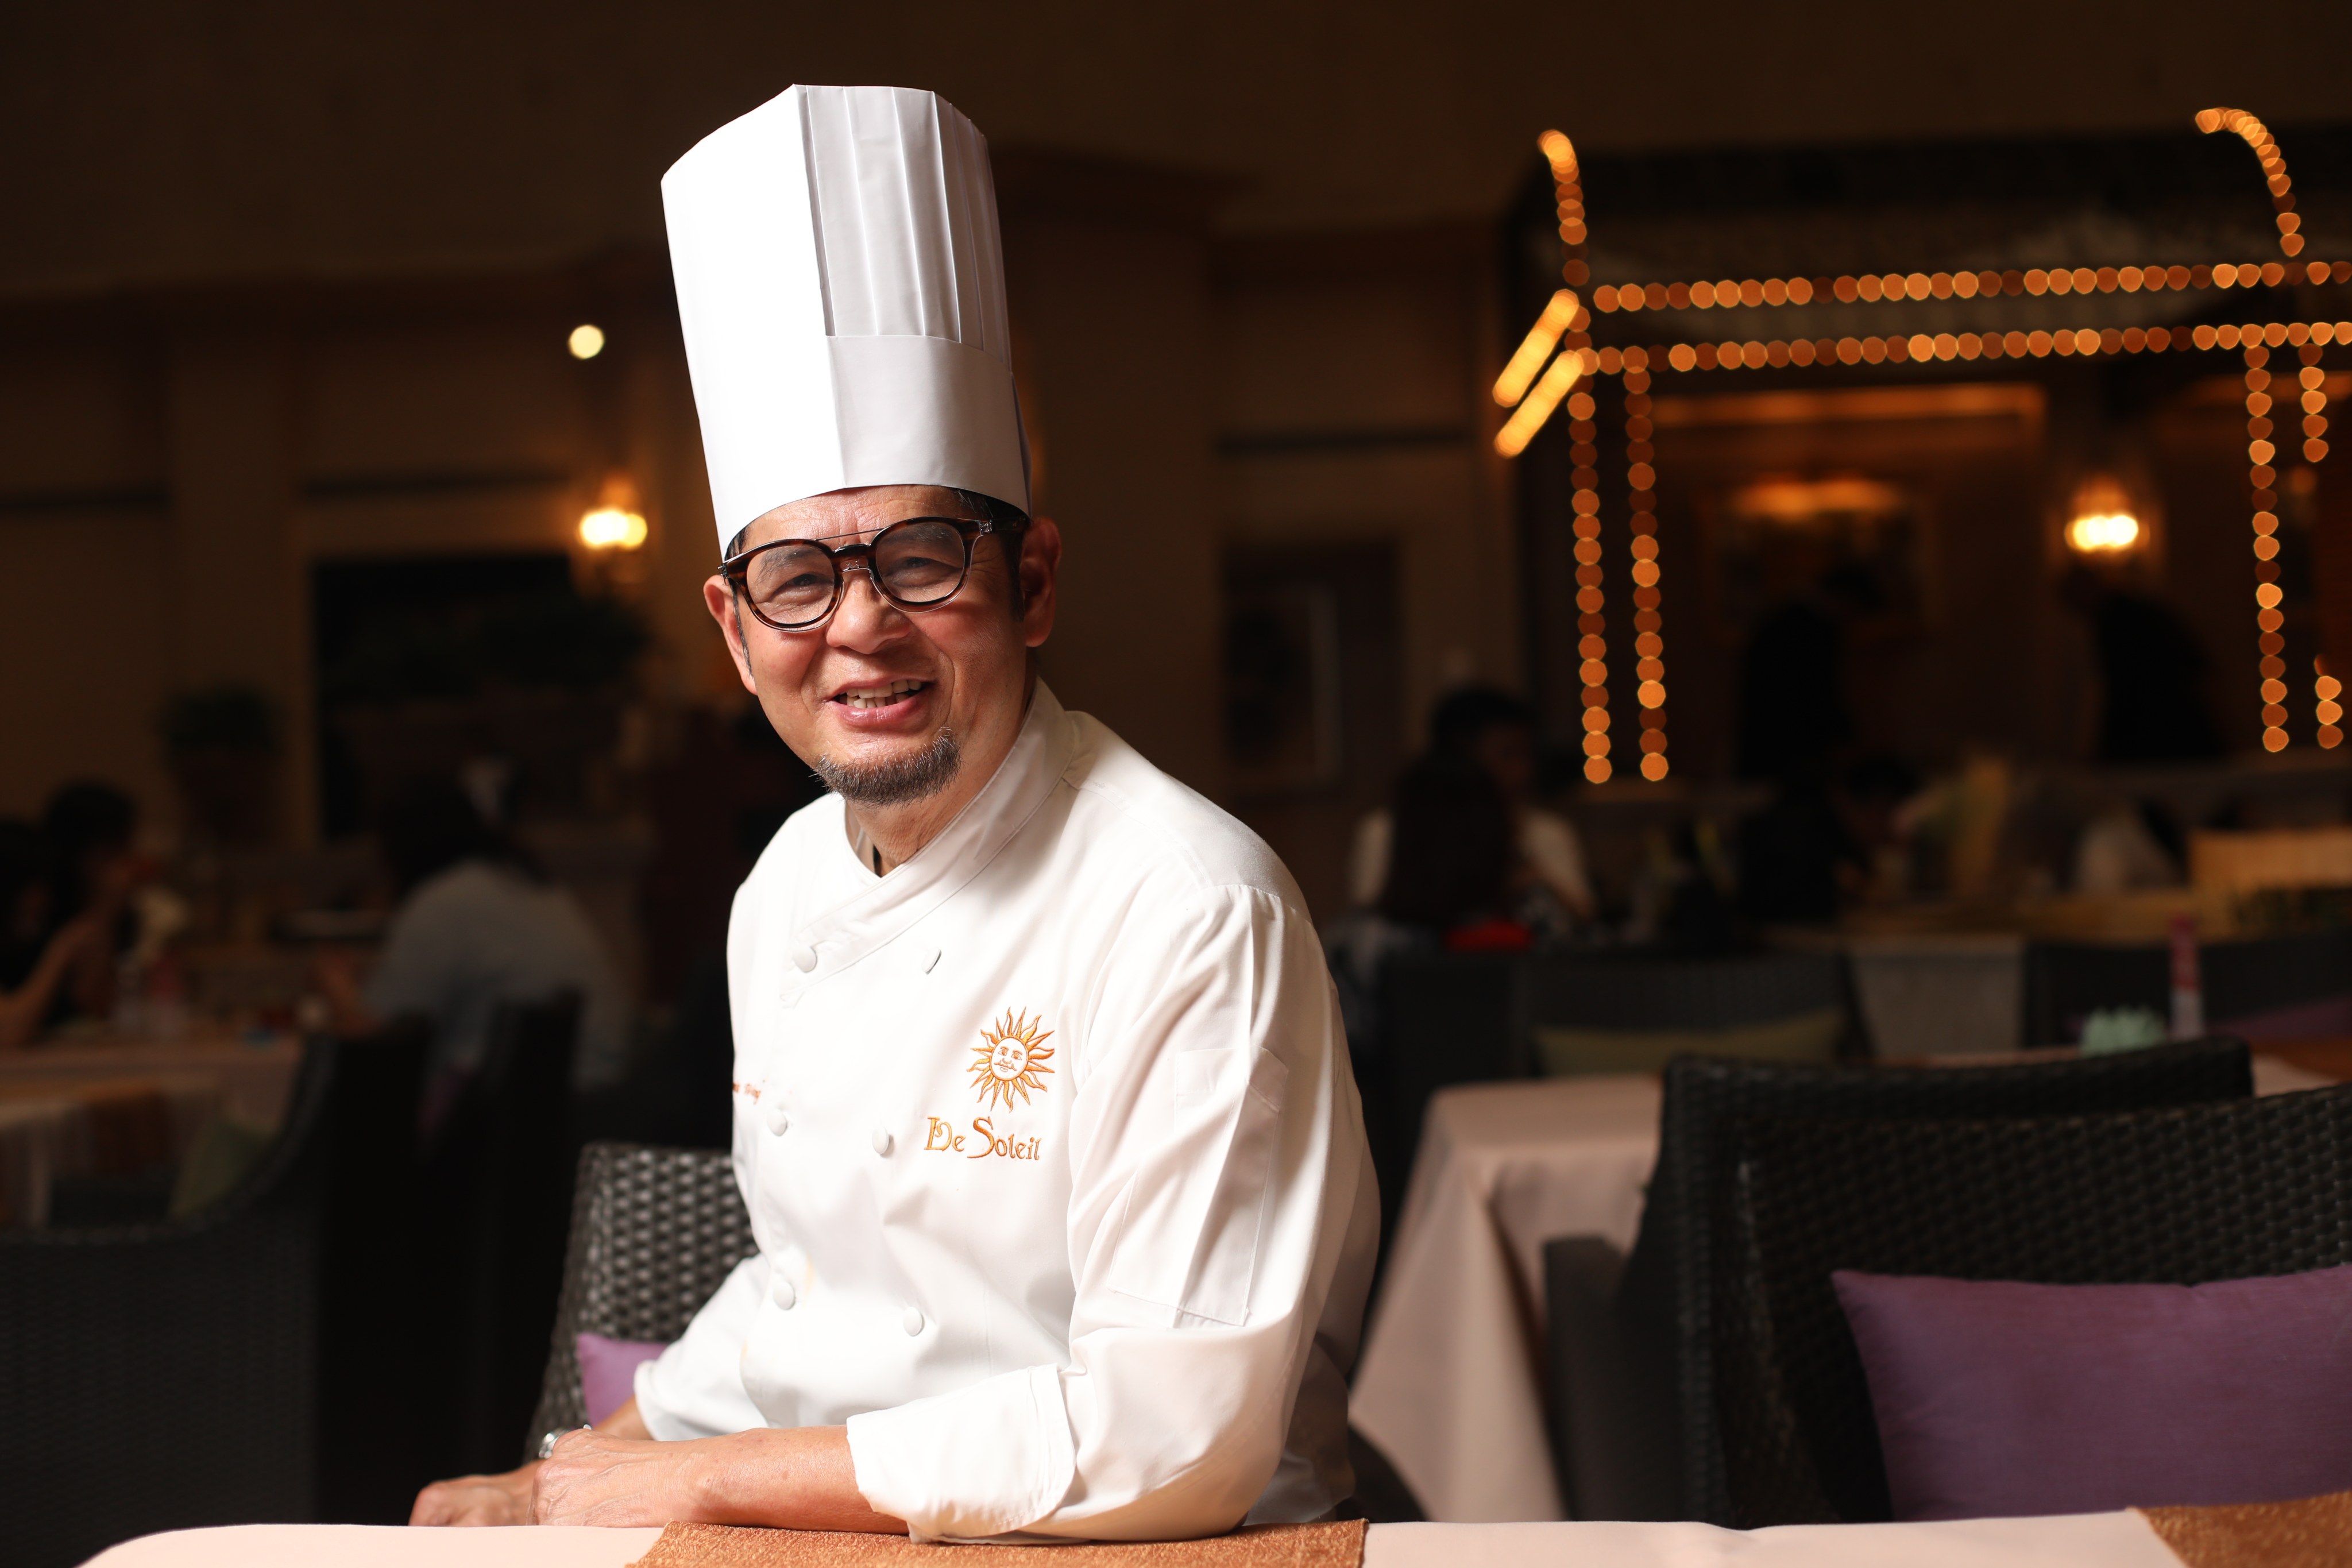 Chef Dennis Wong, founder of Vietnamese restaurant Le Soleil, at the restaurant’s Tsim Sha Tsui location, in Hong Kong. Wong opens up about his journey from refugee to becoming a head chef. Photo: Xiaomei Chen